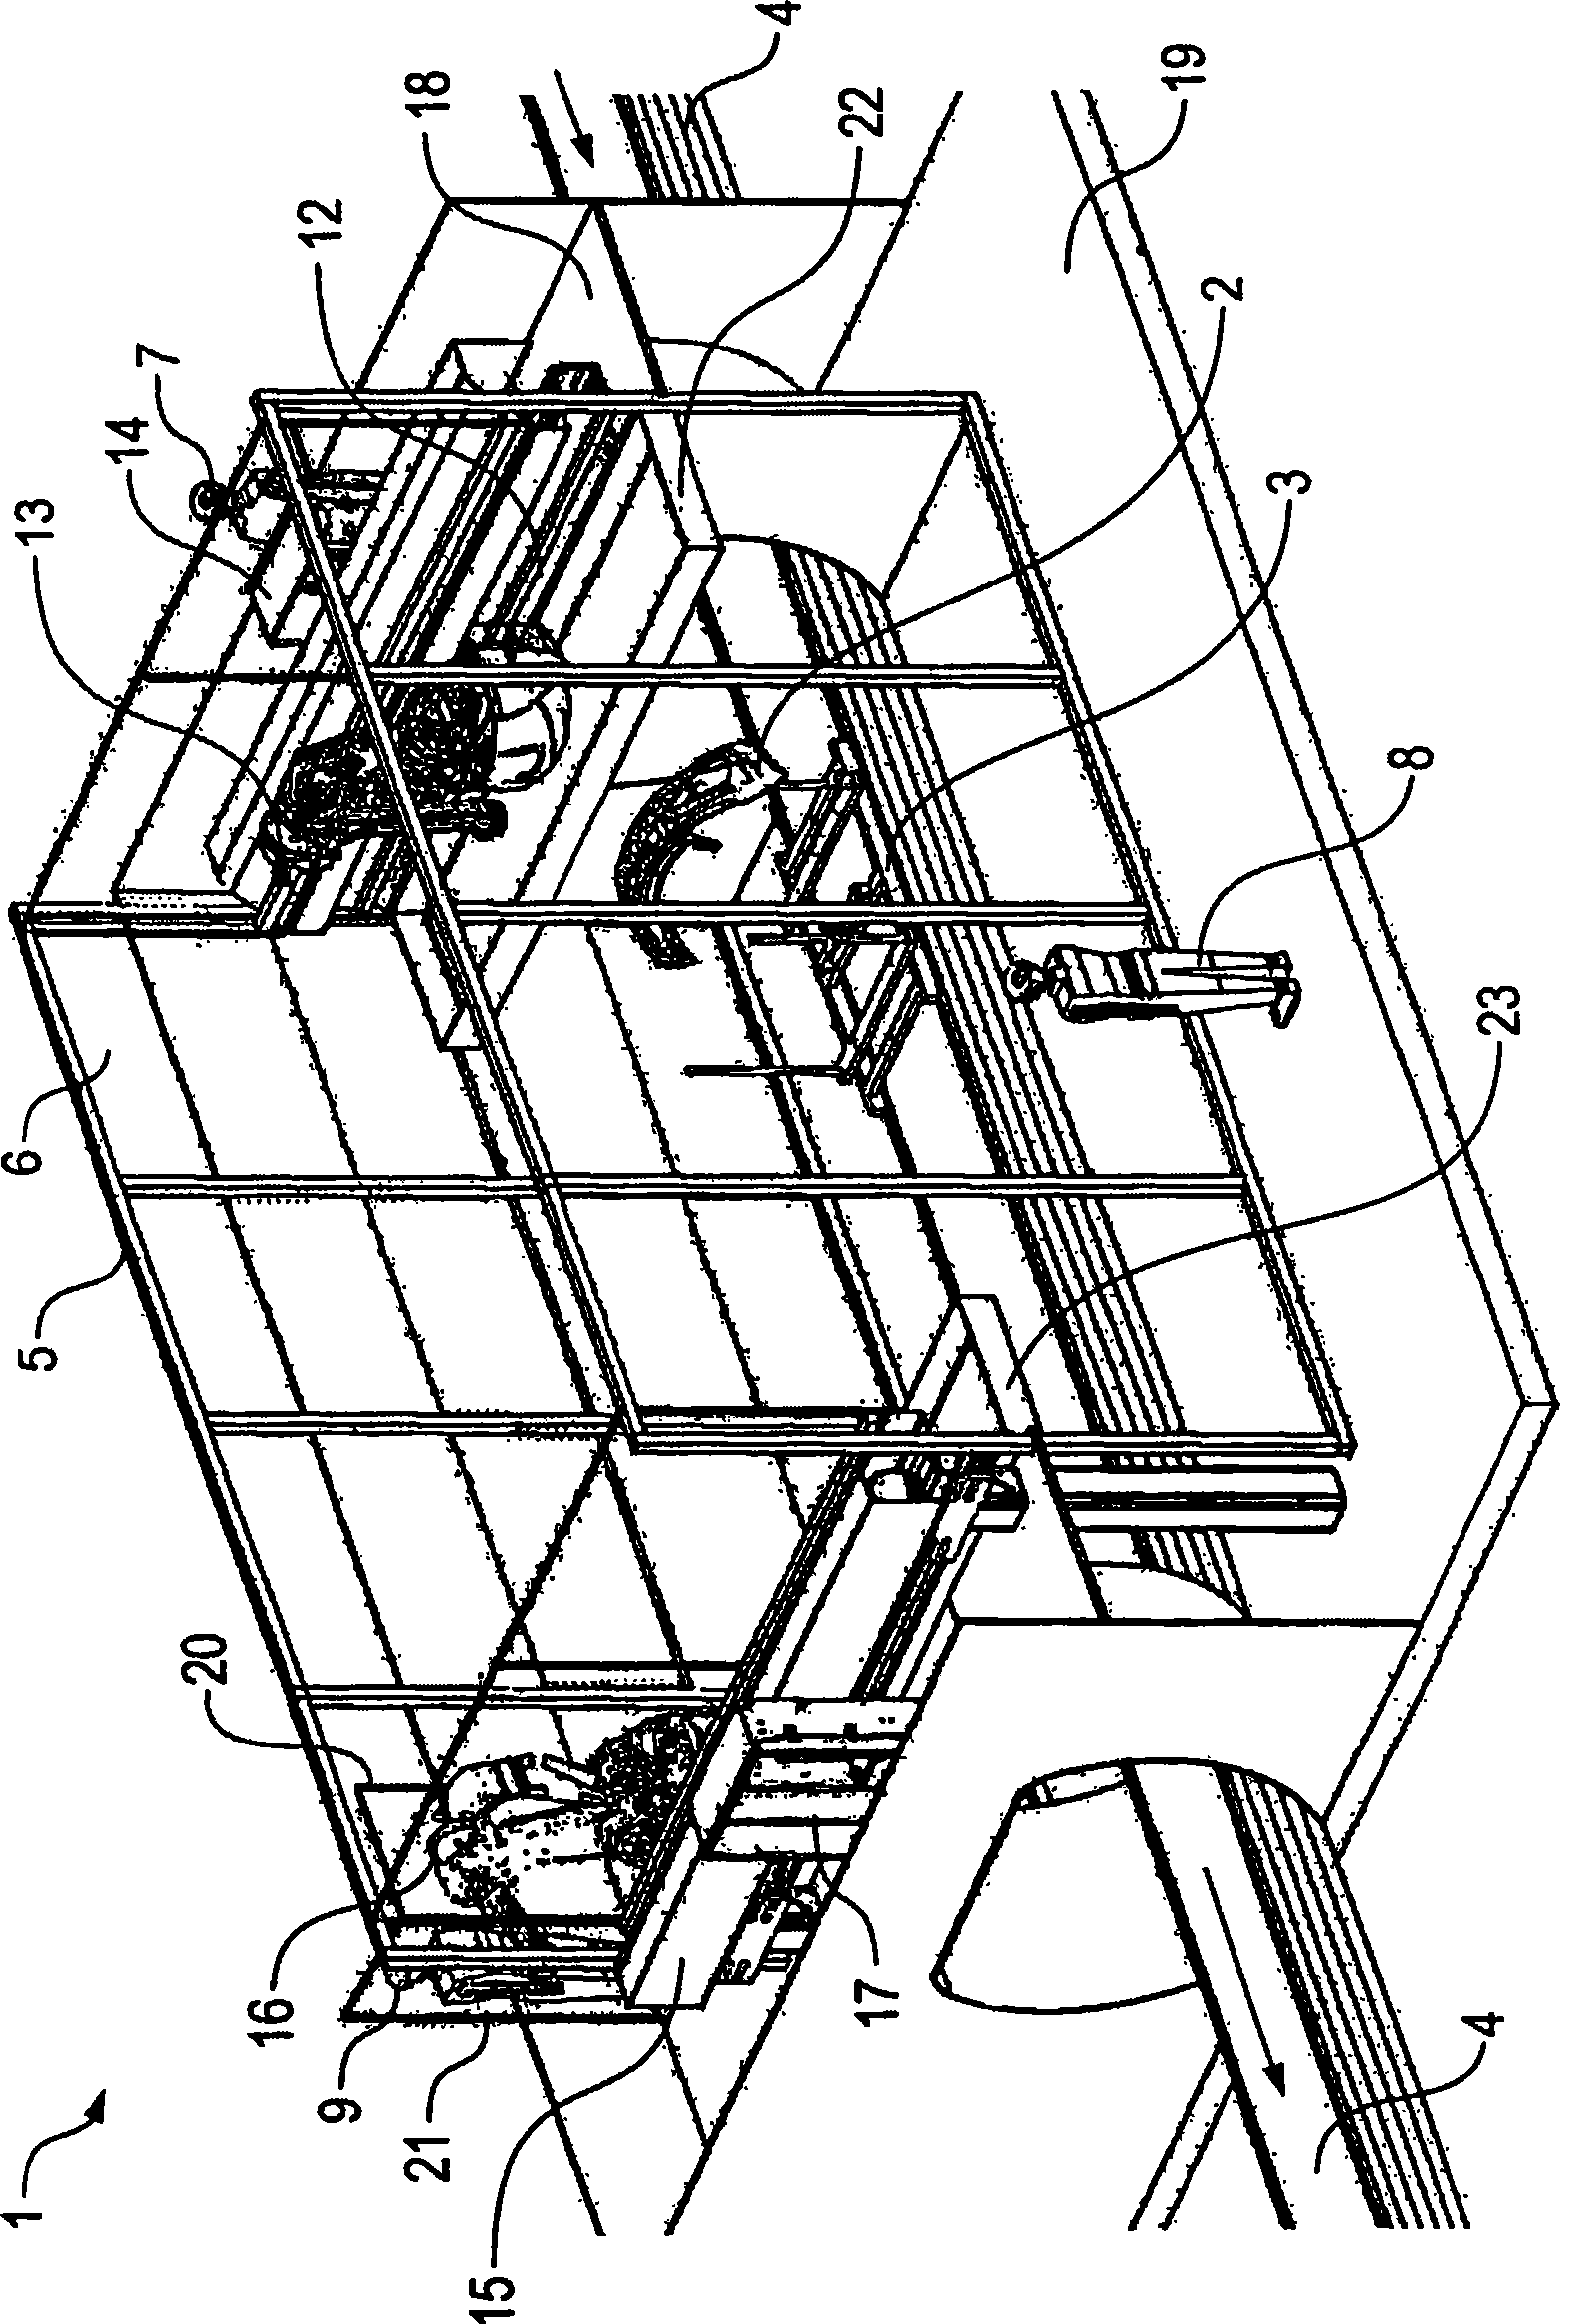 Paint shop and corresponding method of operation